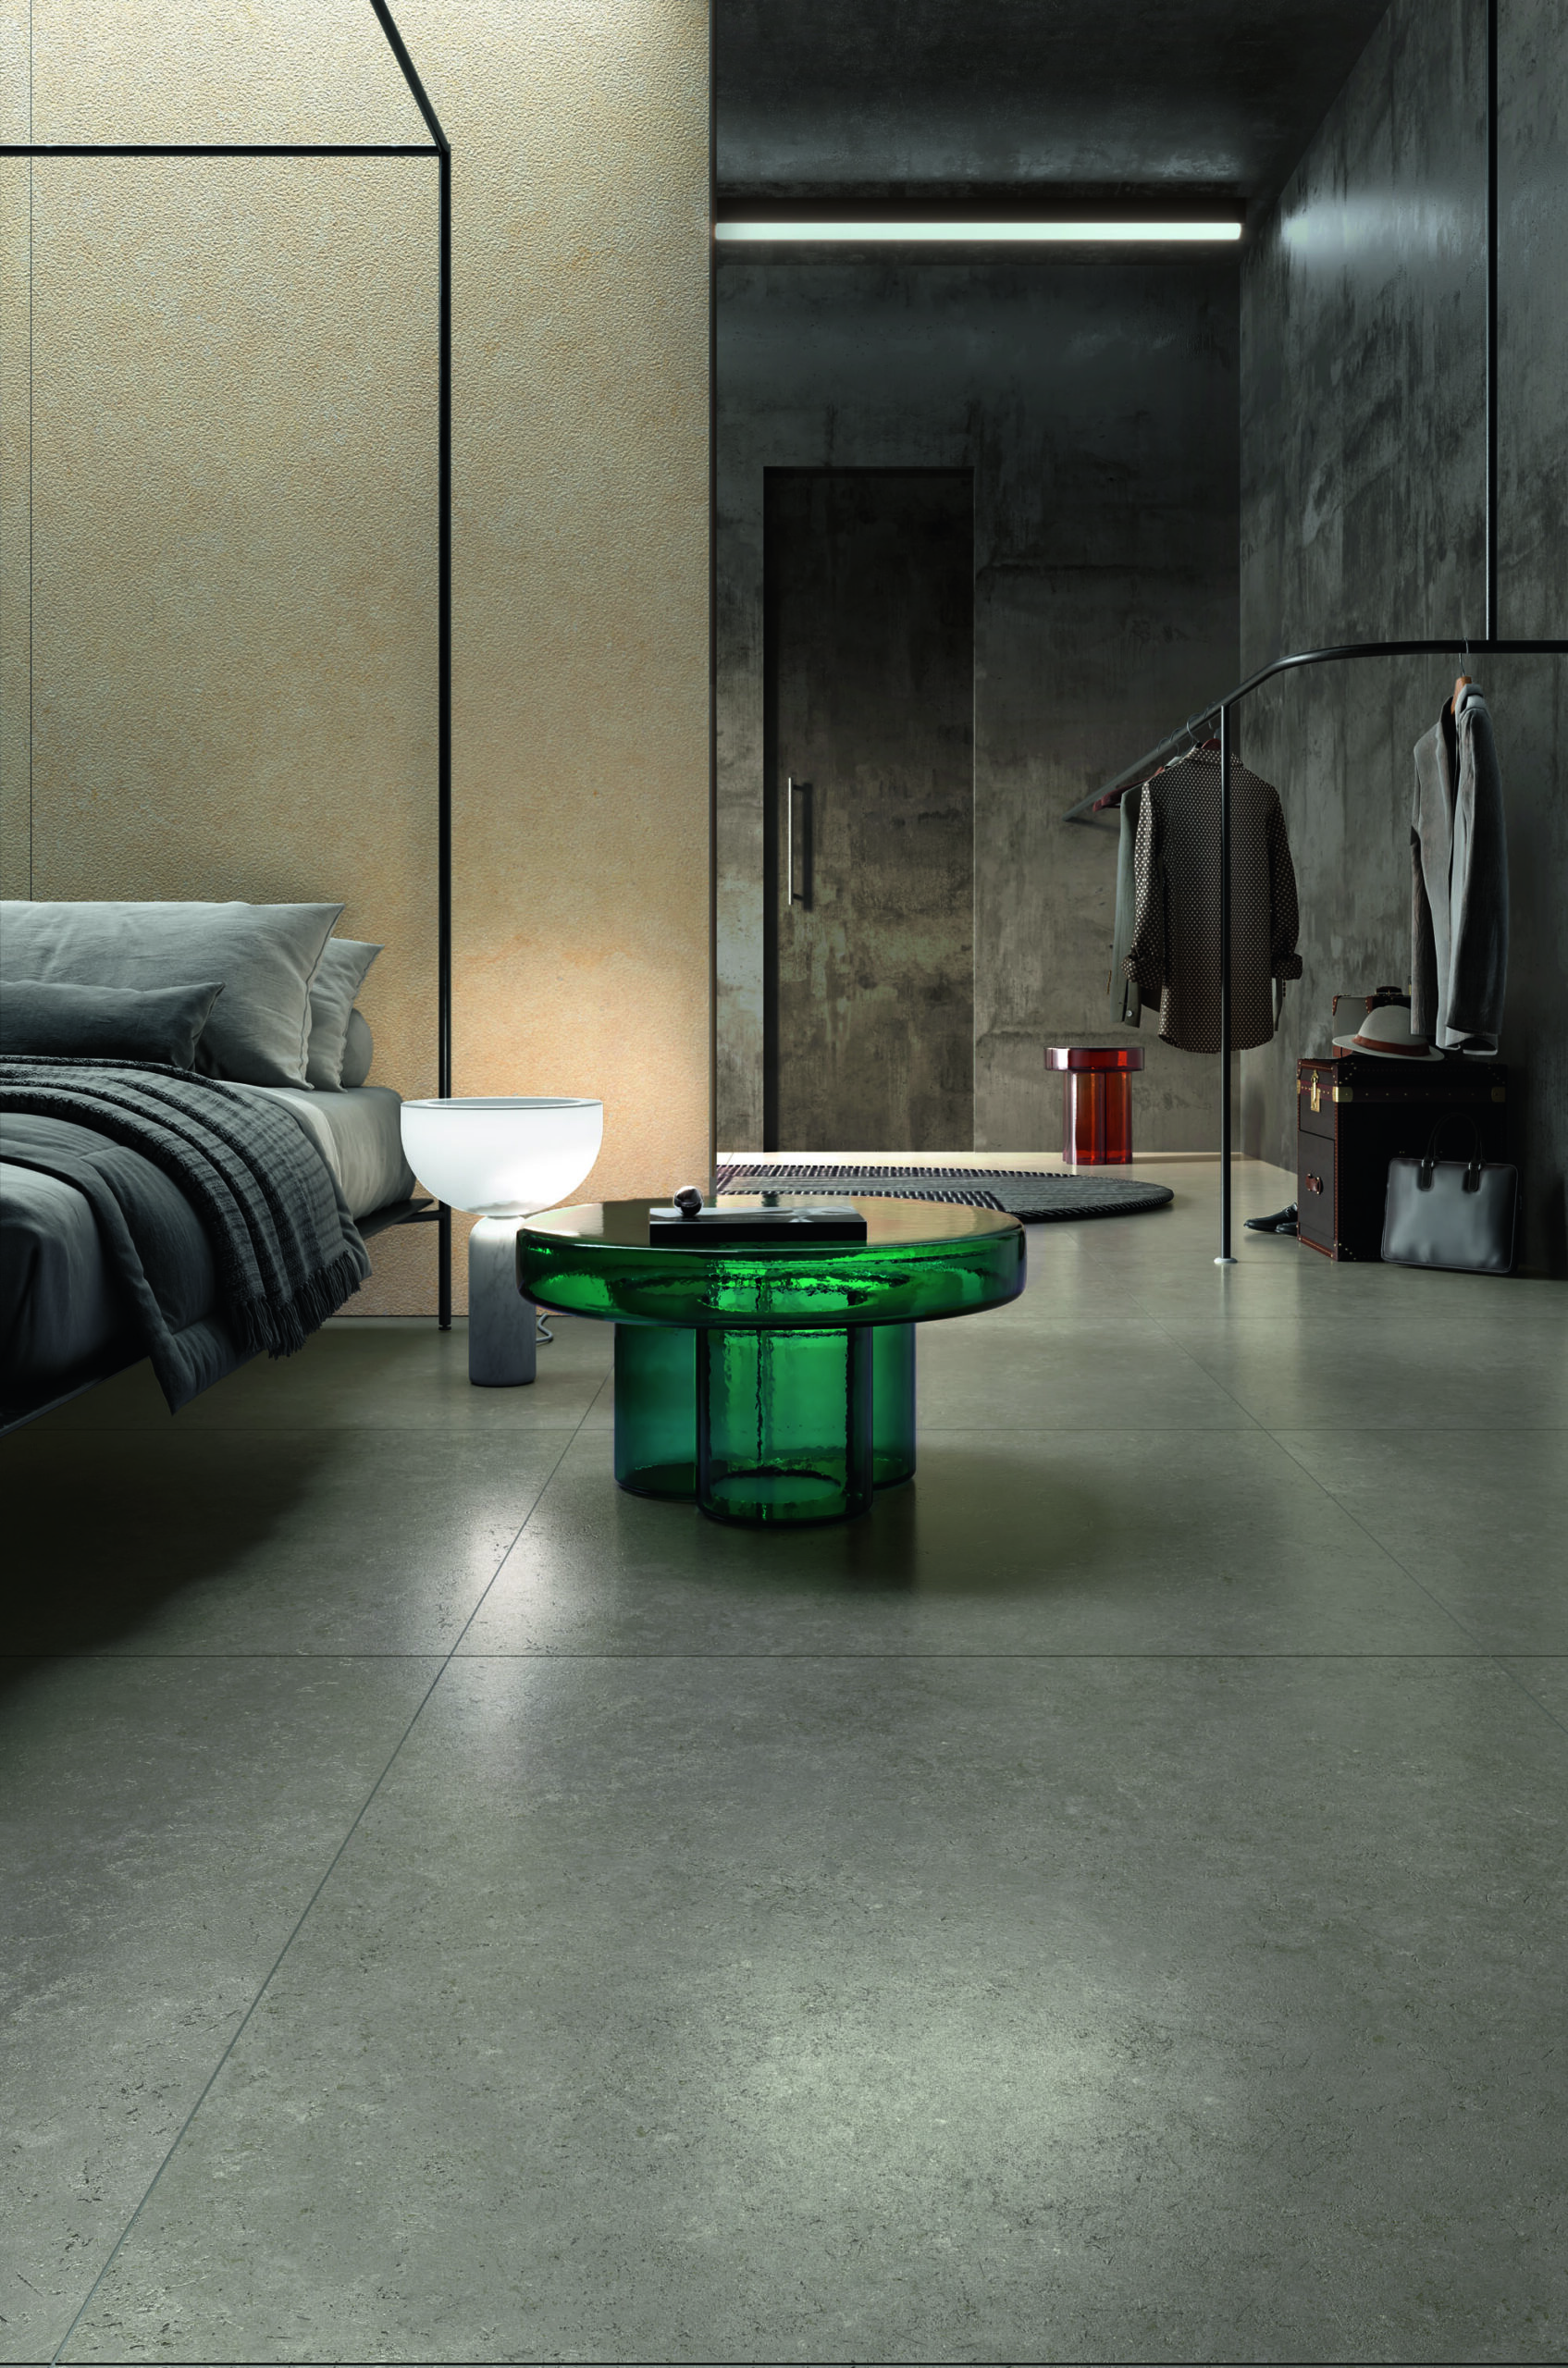 Bedroom with green glass table, hanging clothes and walls and floor covered in greenish porcelain tile.